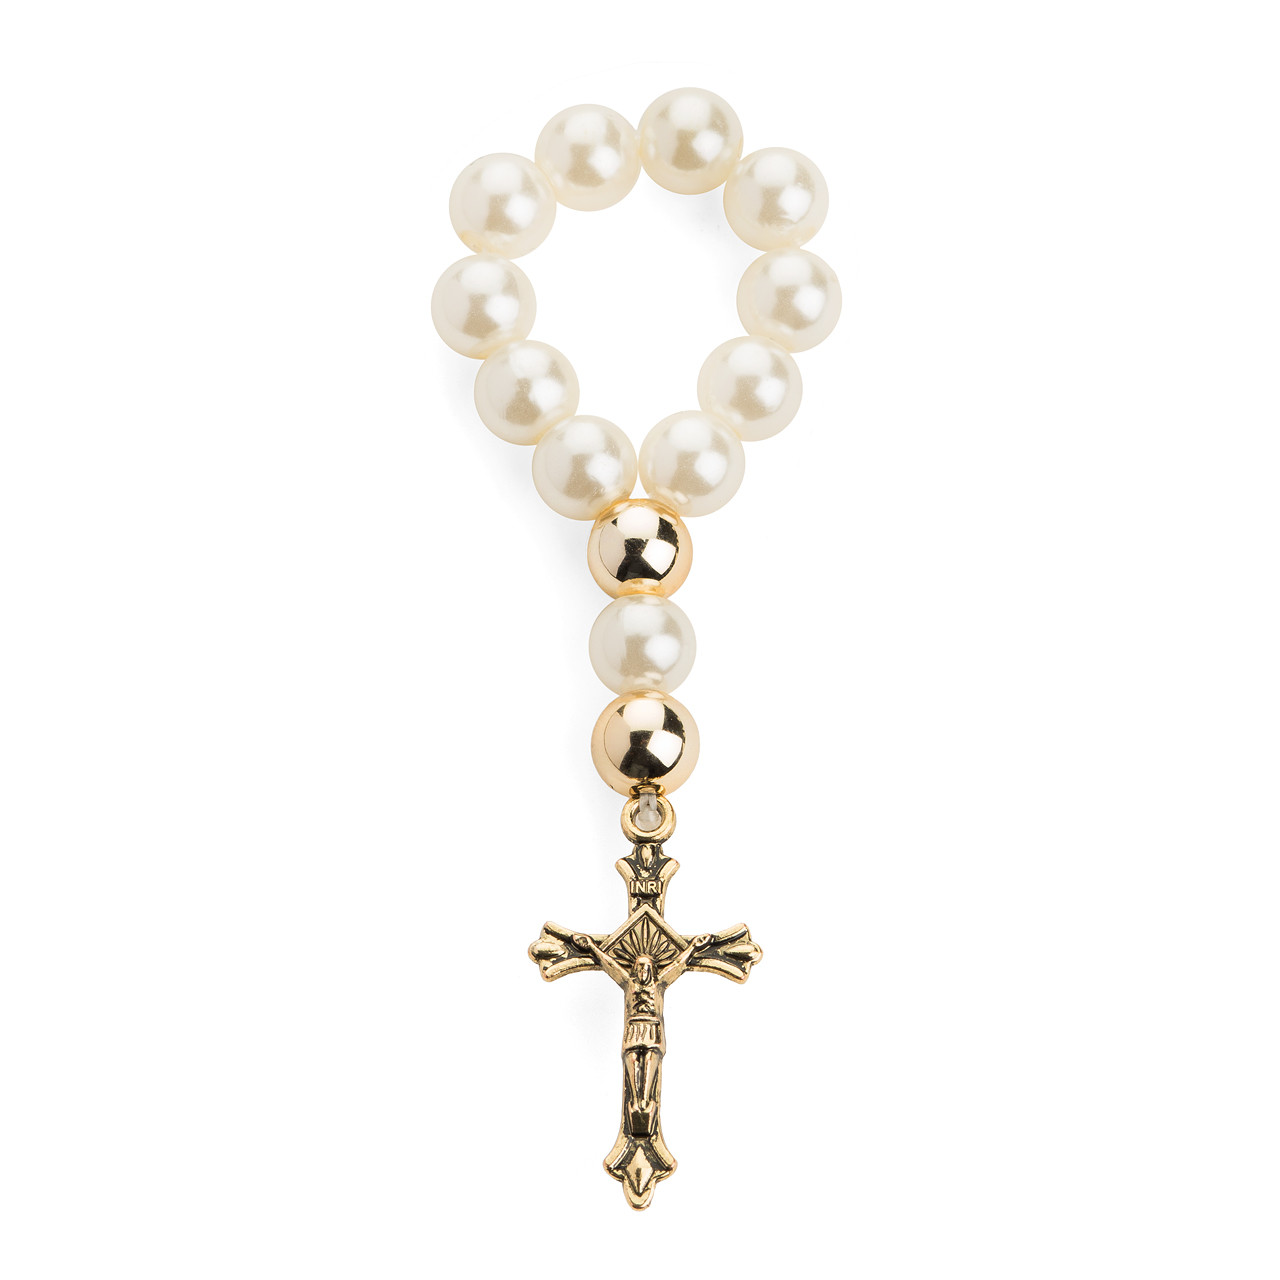 Mini Faux Pearl Religious Charm Bracelet For Catholic Cross With